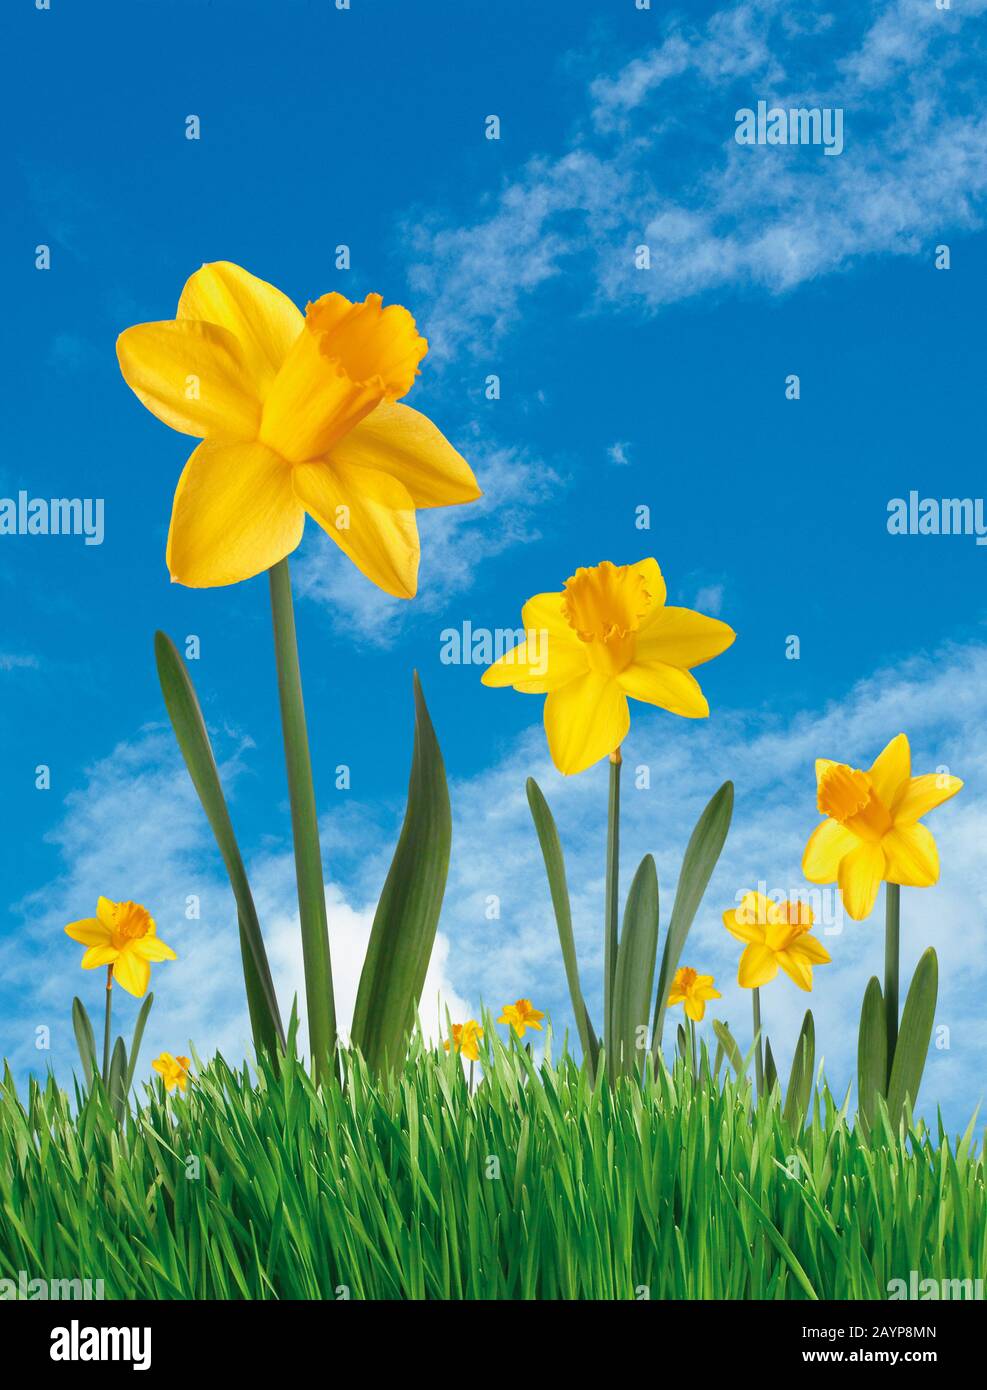 Daffodils close up against a blue sky. Low viewpoint. Spring Stock Photo